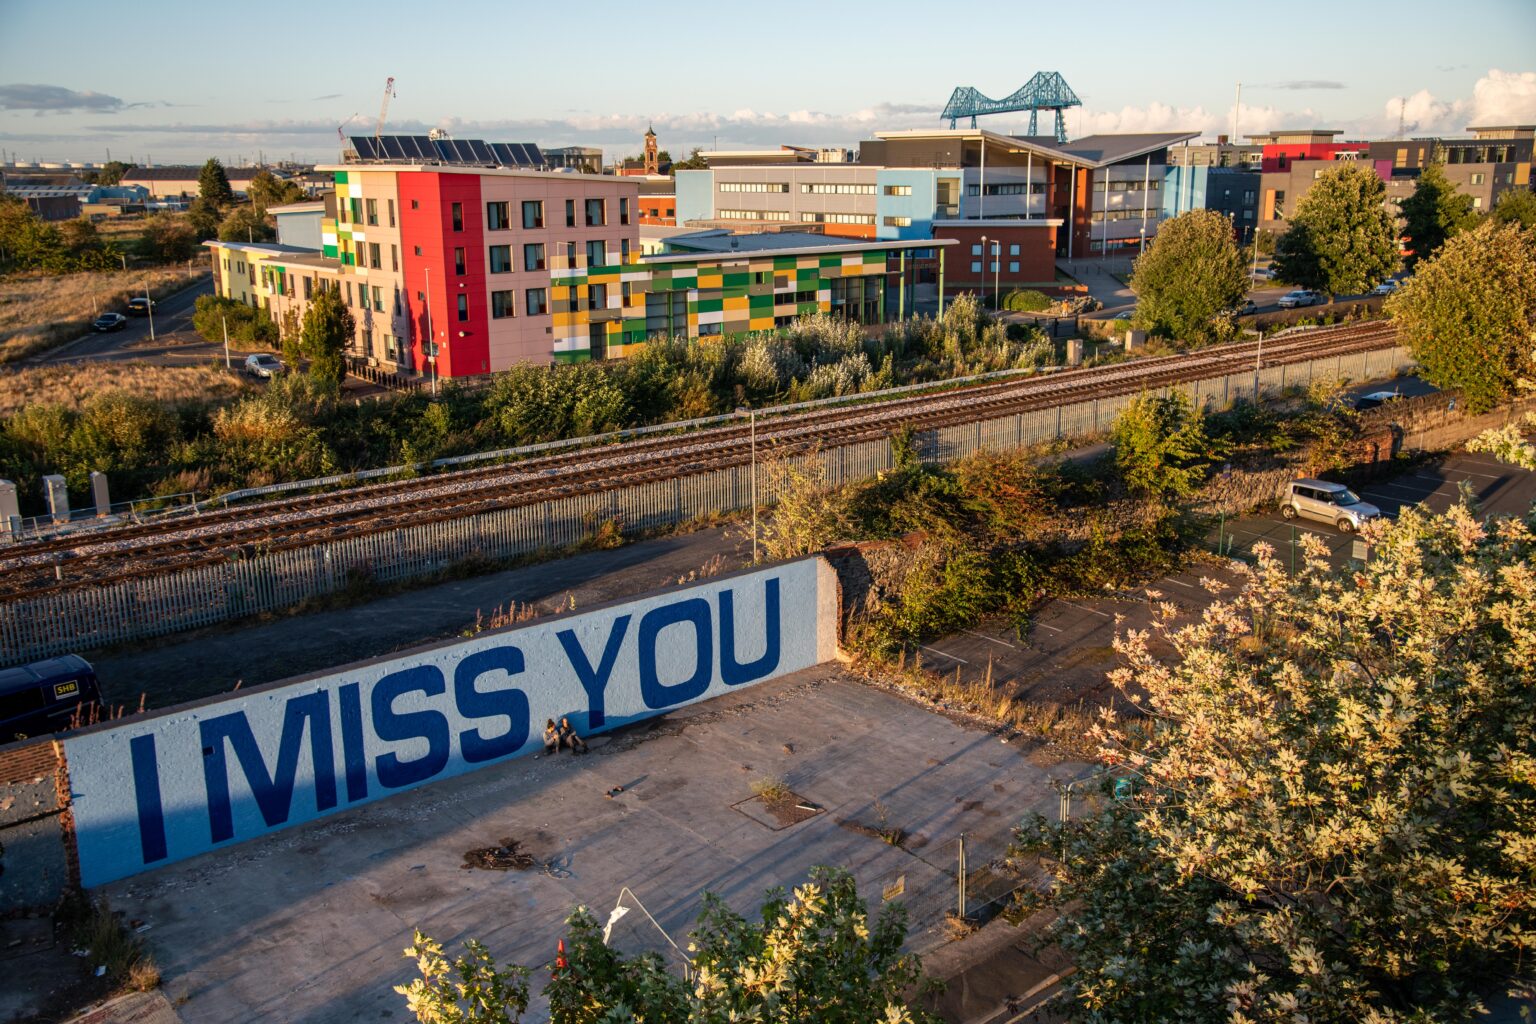 A view of post-industrial Middlesbrough. In the foreground is a piece of wasteland with the words I miss you, painted in large blue letters against white, on a wall. Two figures are sitting close together against the wall. In the middle ground are railway tracks and some contemporary urban buildings. In the distance is the transporter bridge and a clear evening sky dotted with clouds. Warm light and long shadows indicate that the sun might set soon.